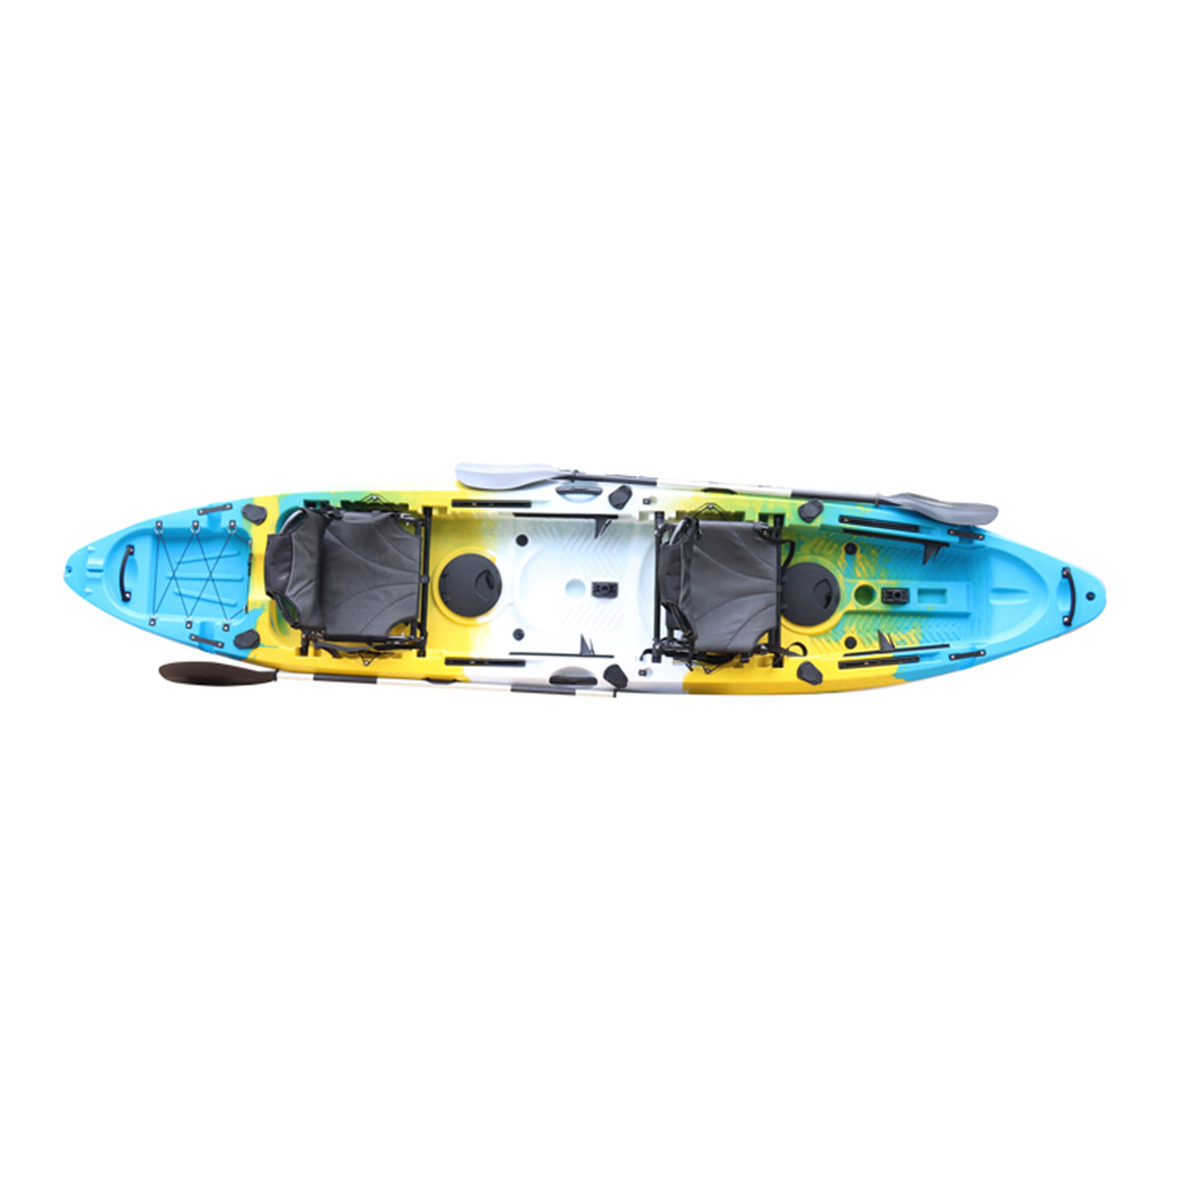 Skid Fusion Kayak with Paddle 2-Seat 396x86x42cm Assorted Color & Design